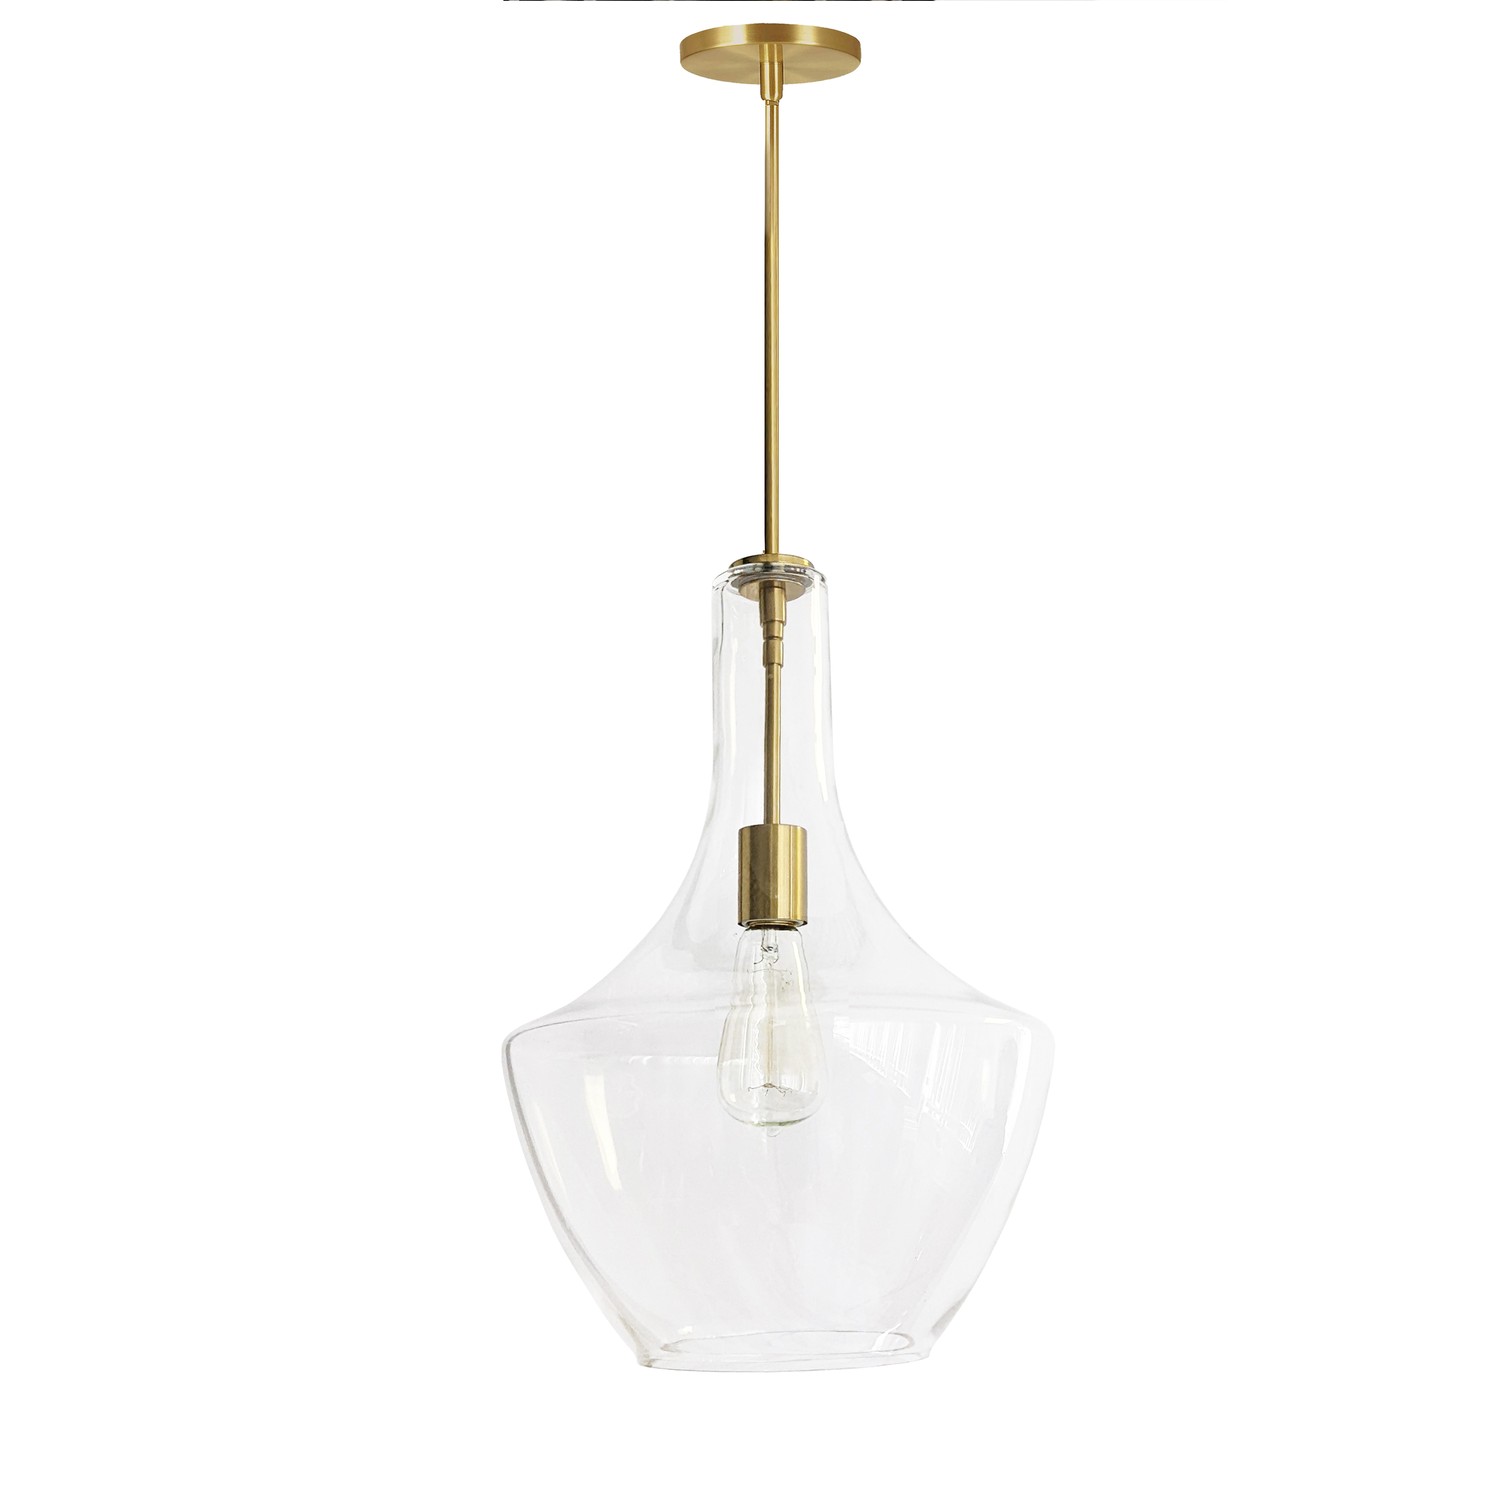 1 Light Incandescent Pendant, Aged Brass with Clear Glass